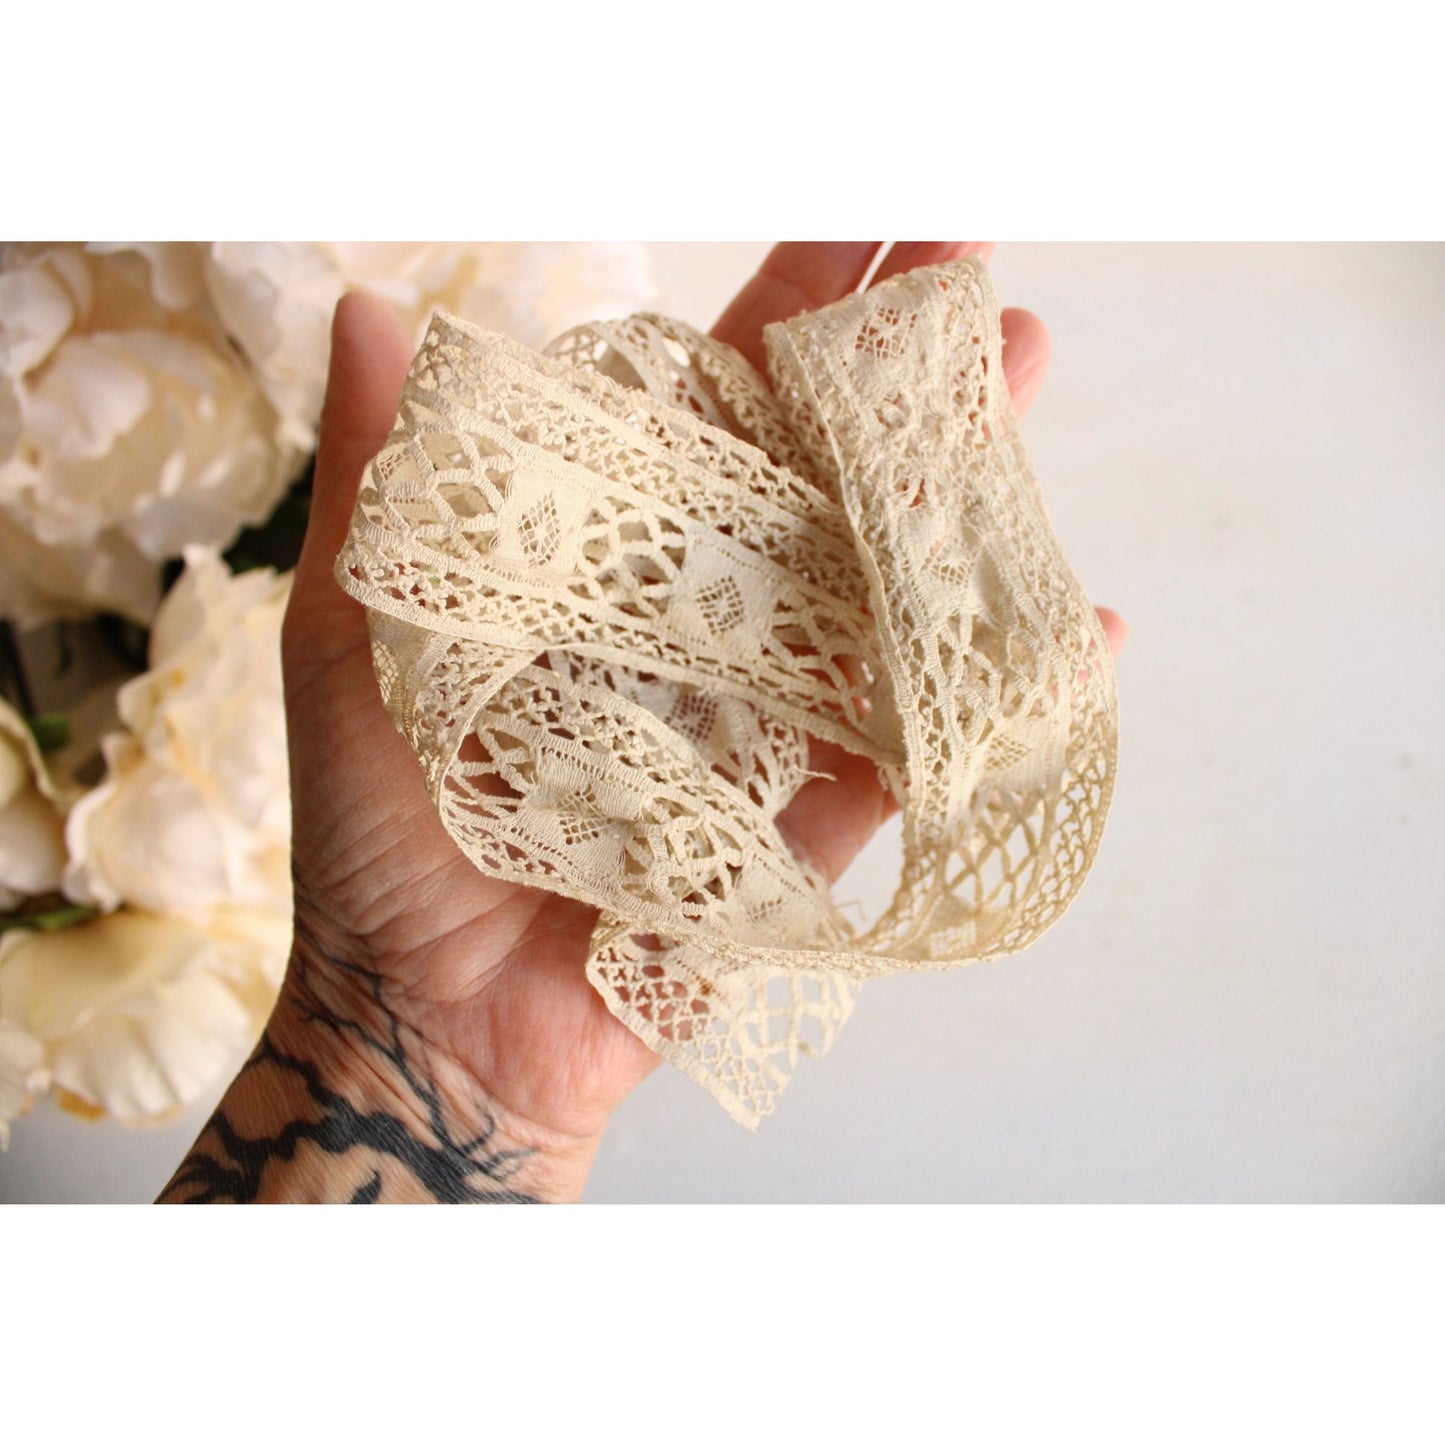 Vintage Antique Victorian Lace Trim ,Ivory Crochet Lace ,41" Long, 1.5" Wide ,Altered Art Sewing Crafting Costume Edwardian